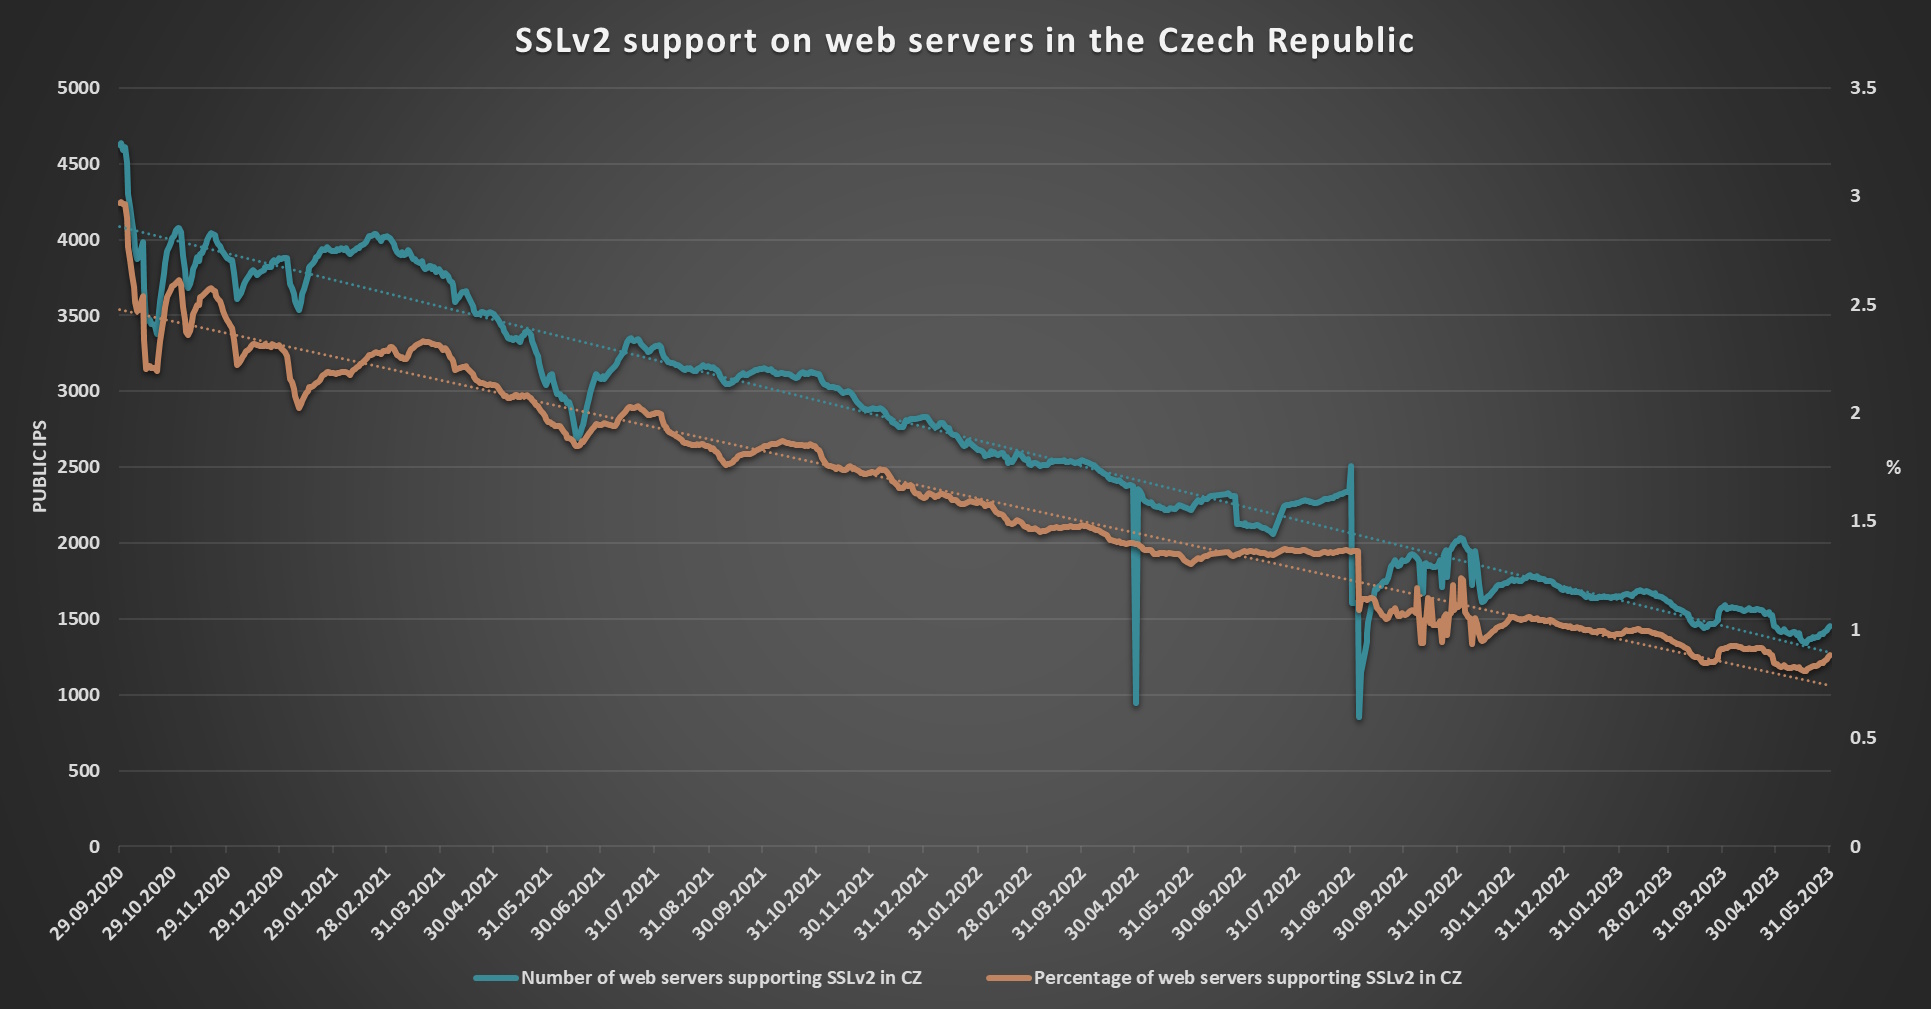 SSLv2 support on web servers in the Czech Republic